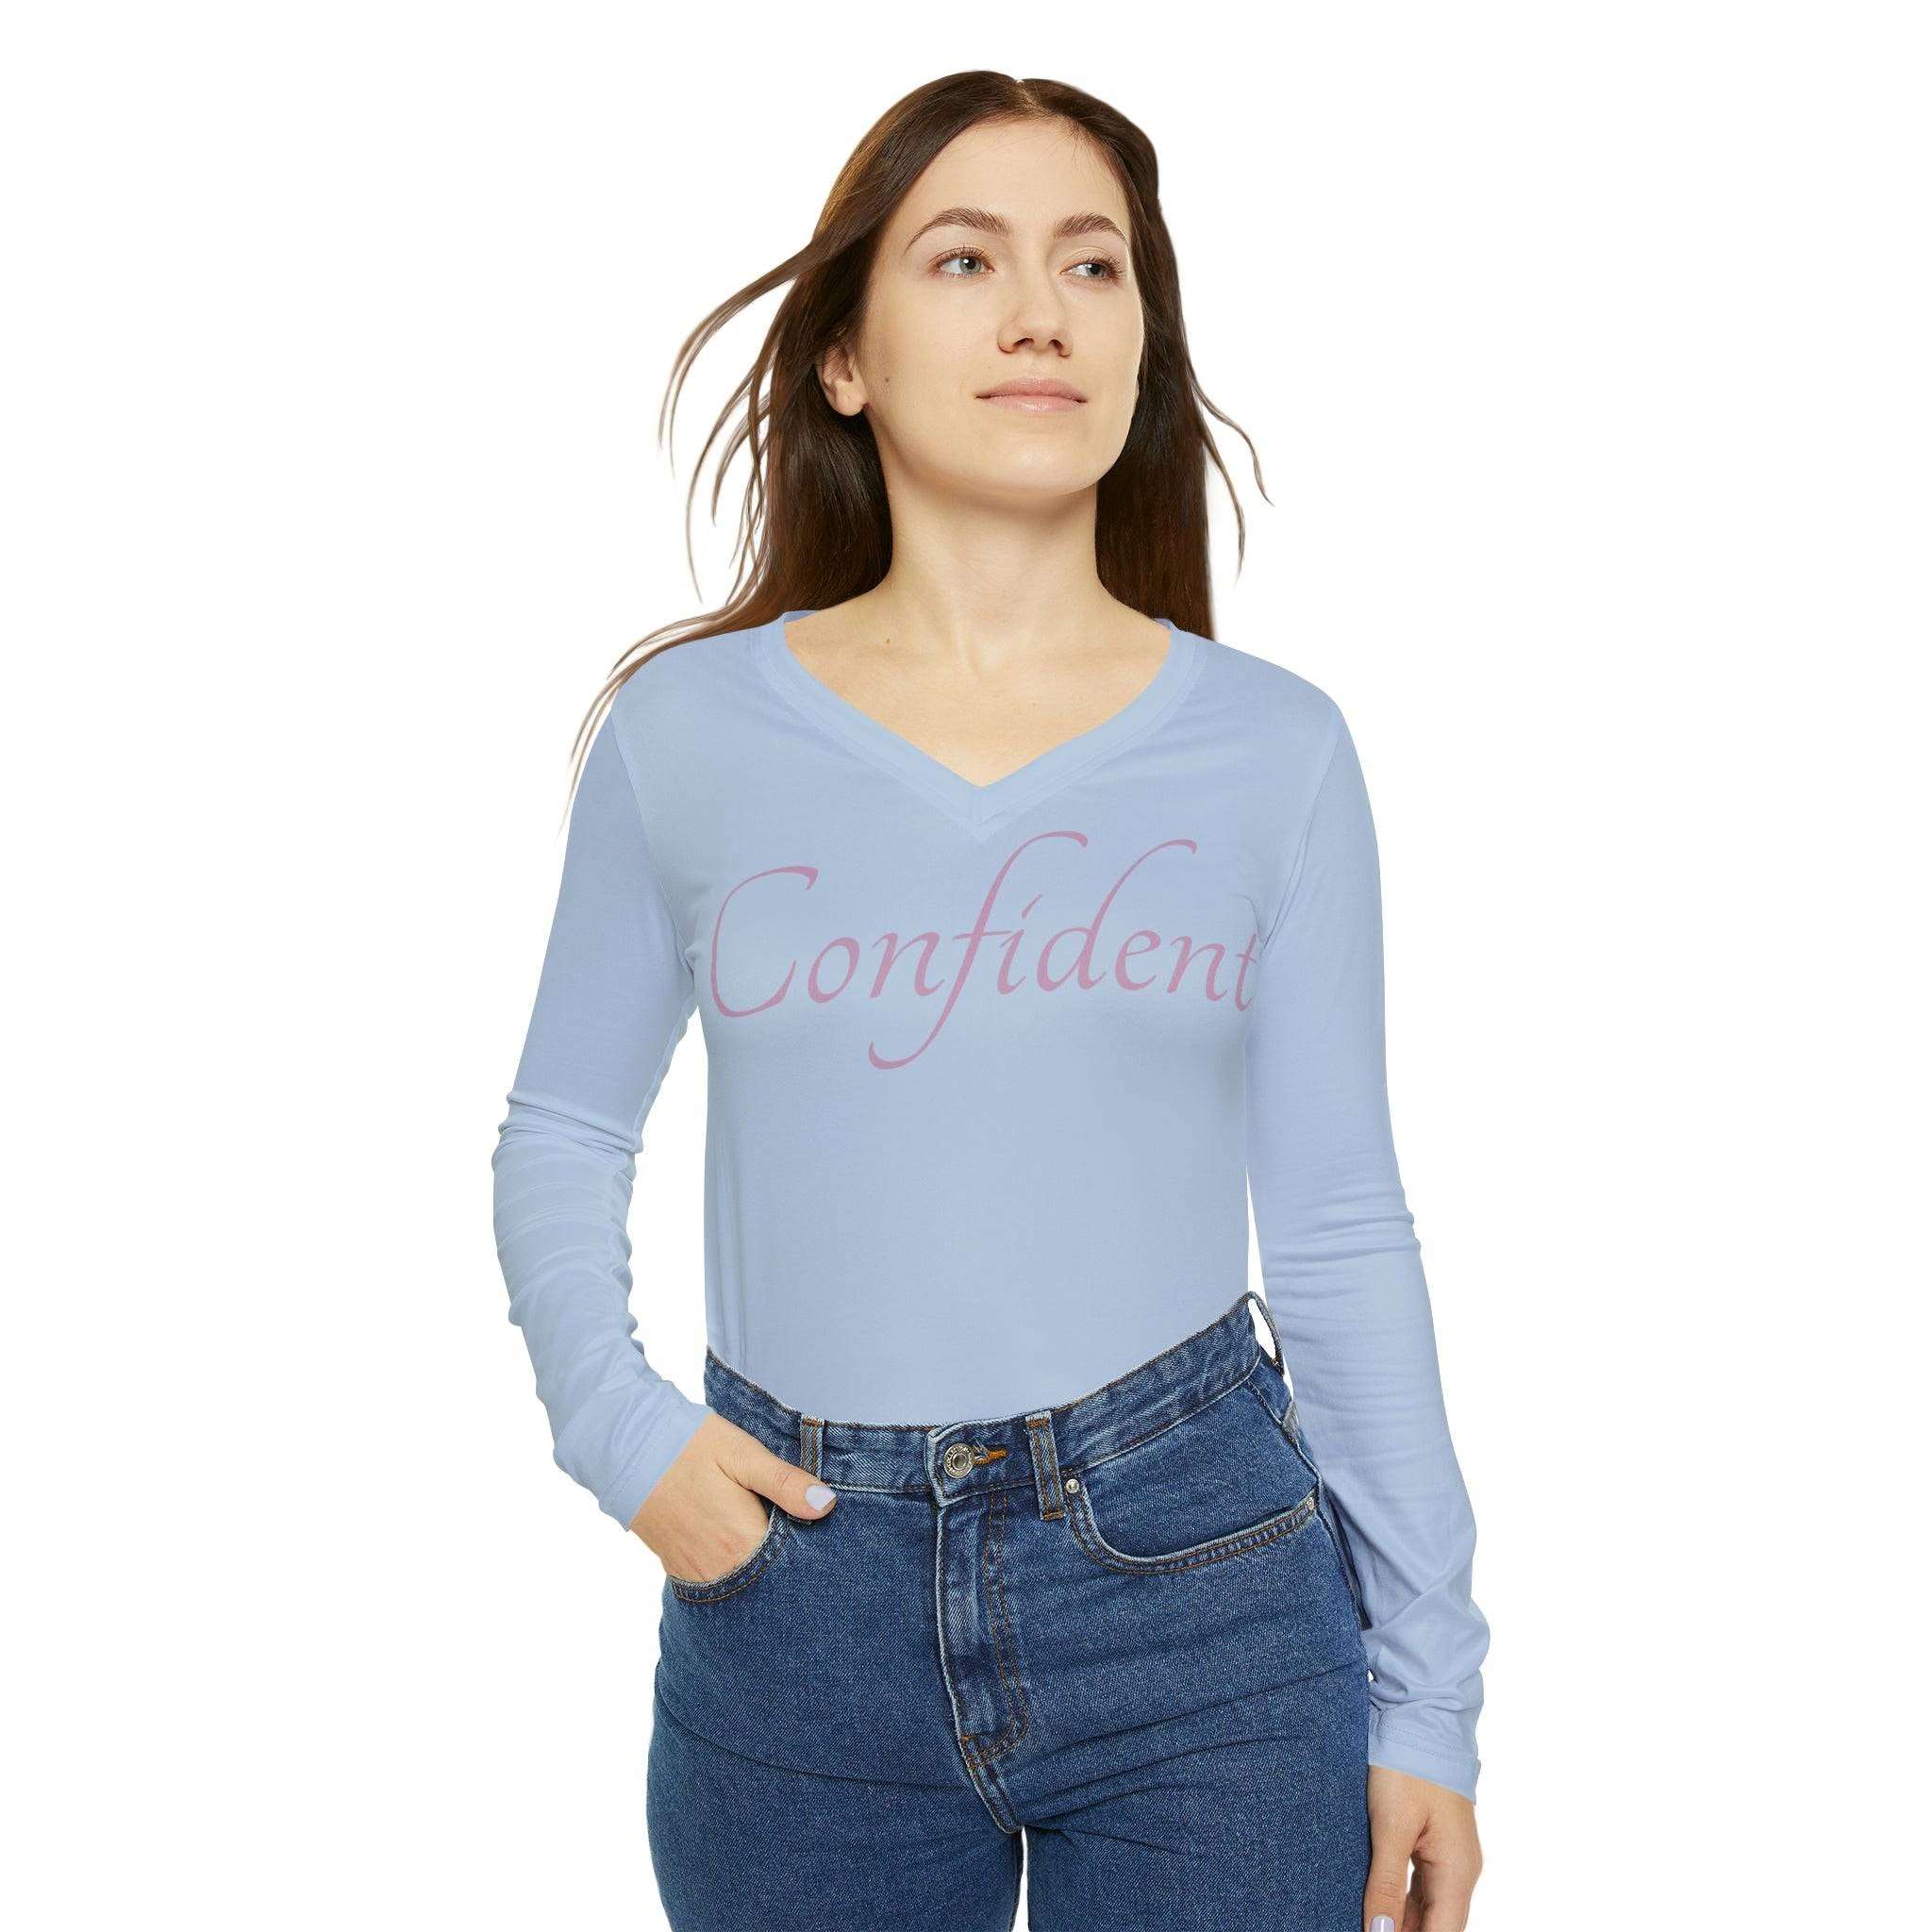 Confident Long Sleeve V-neck: Elevate Everyday Style Everyday Wear Long Sleeve V-neck Mental Health Support Polyester Spandex Blend Statement Shirt Stylish Apparel All Over Prints 14165019233456710002_2048_2fa9c301-1a77-483e-924b-275e566bd0eb Printify